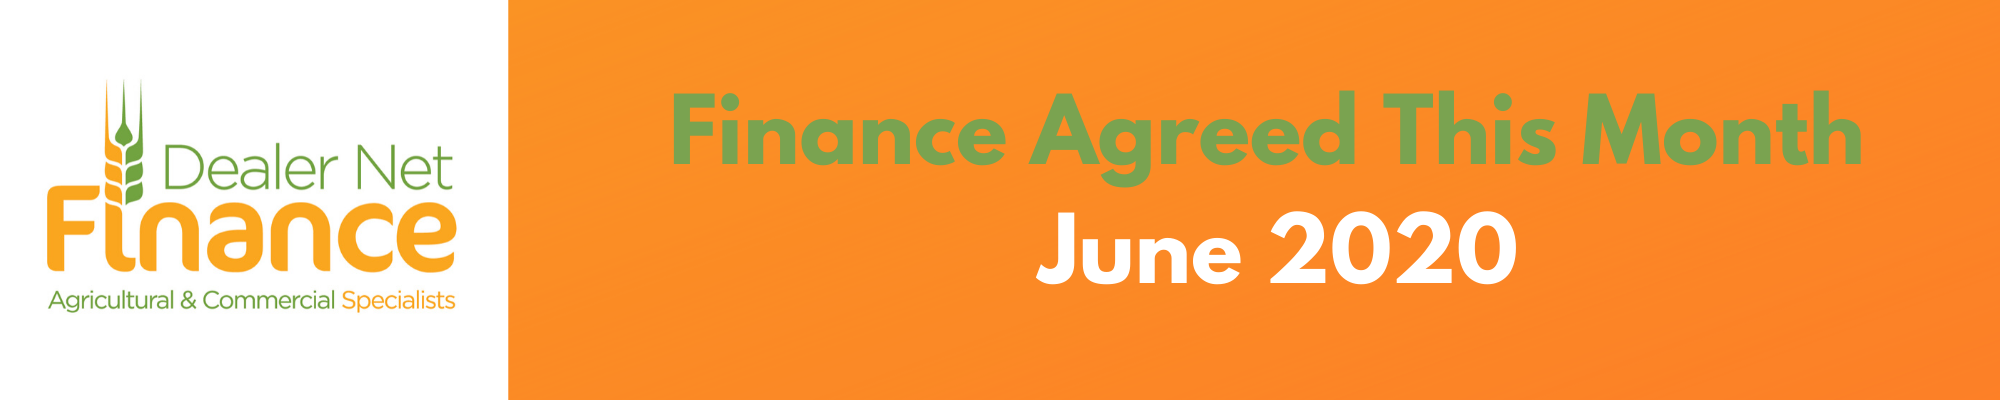 Finance Agreed This Month – June 2020